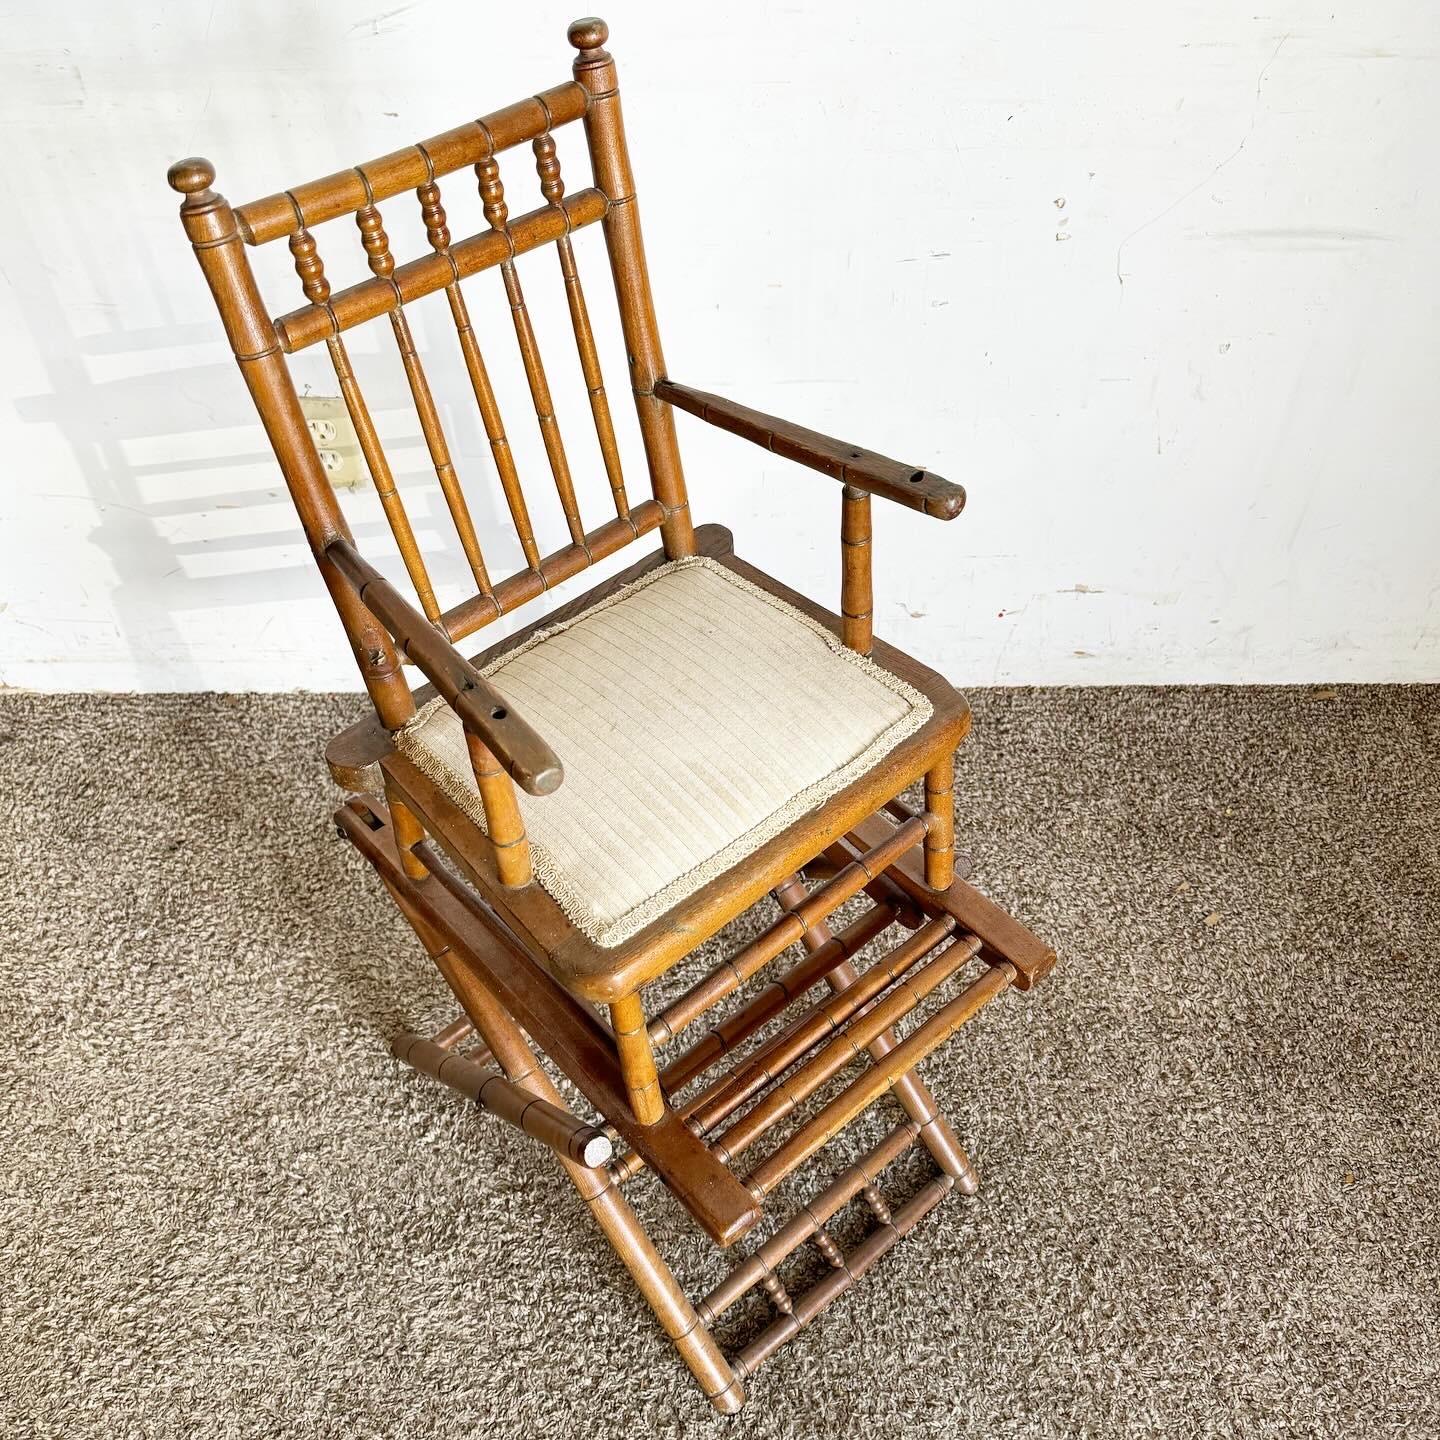 Experience the elegance of an Antique Folding Wooden High Chair, blending vintage charm with functional design.
Vintage pieces may have age-related wear. Review photos carefully, ask questions, request more images. Orders processed in 5-10 business